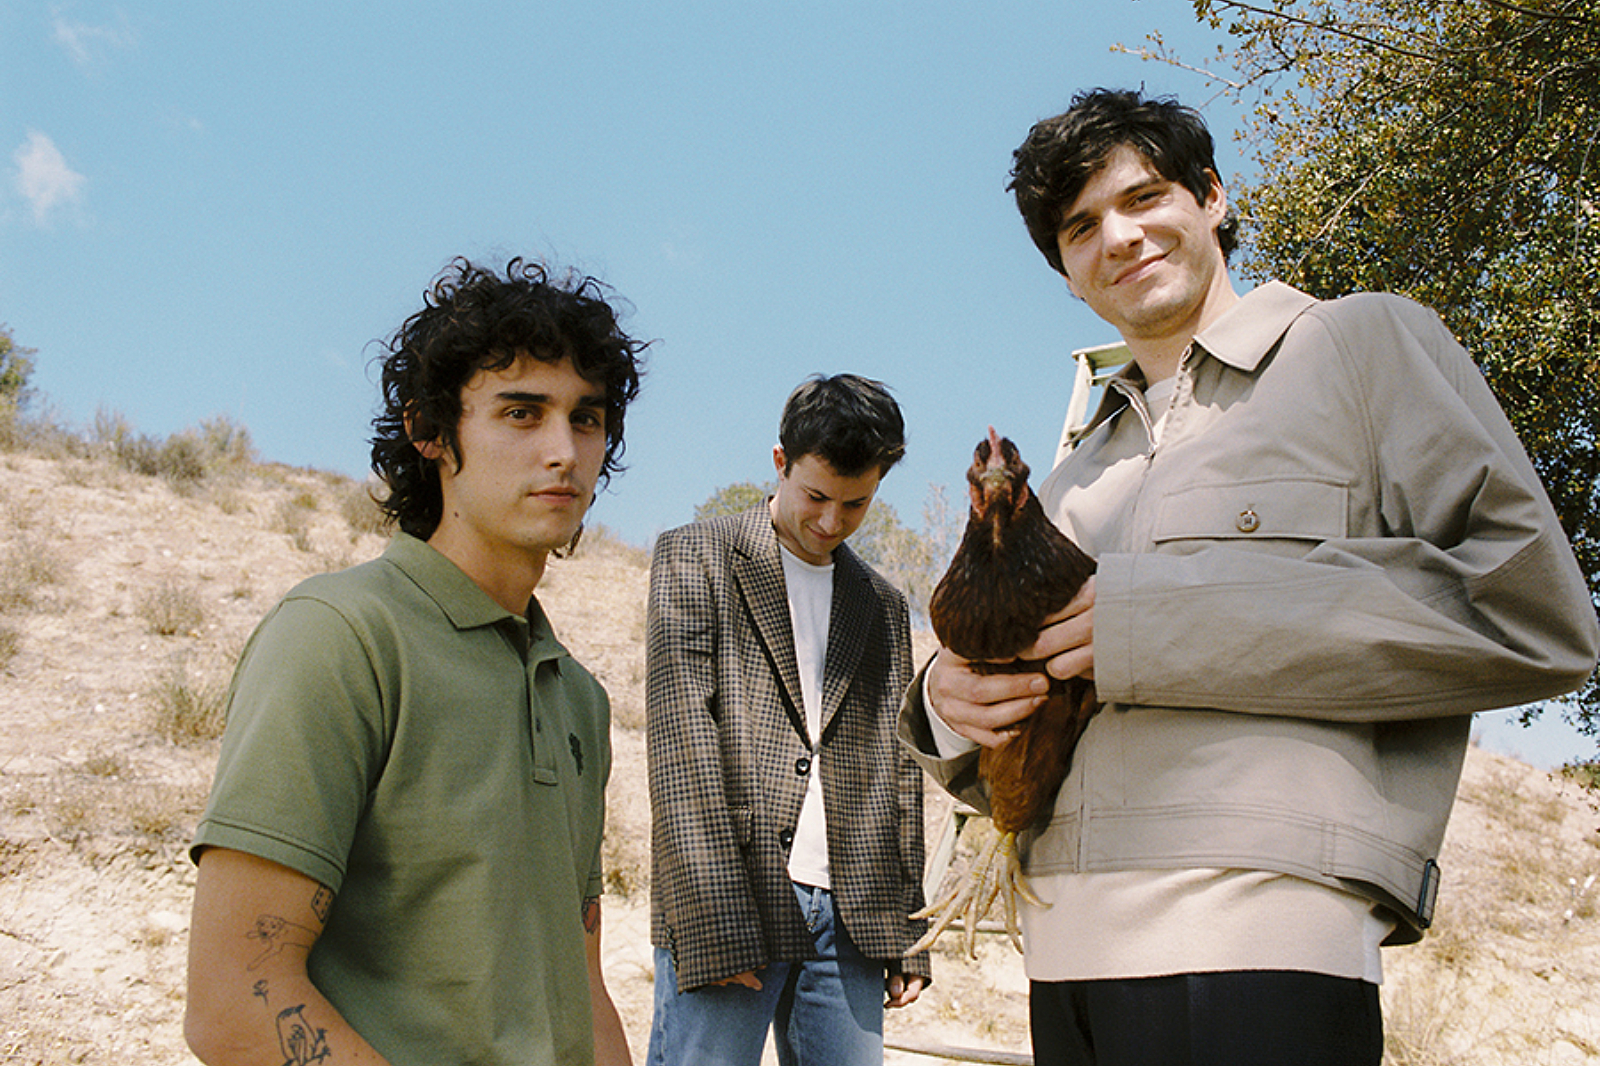 Wallows release new single 'At The End Of The Day'